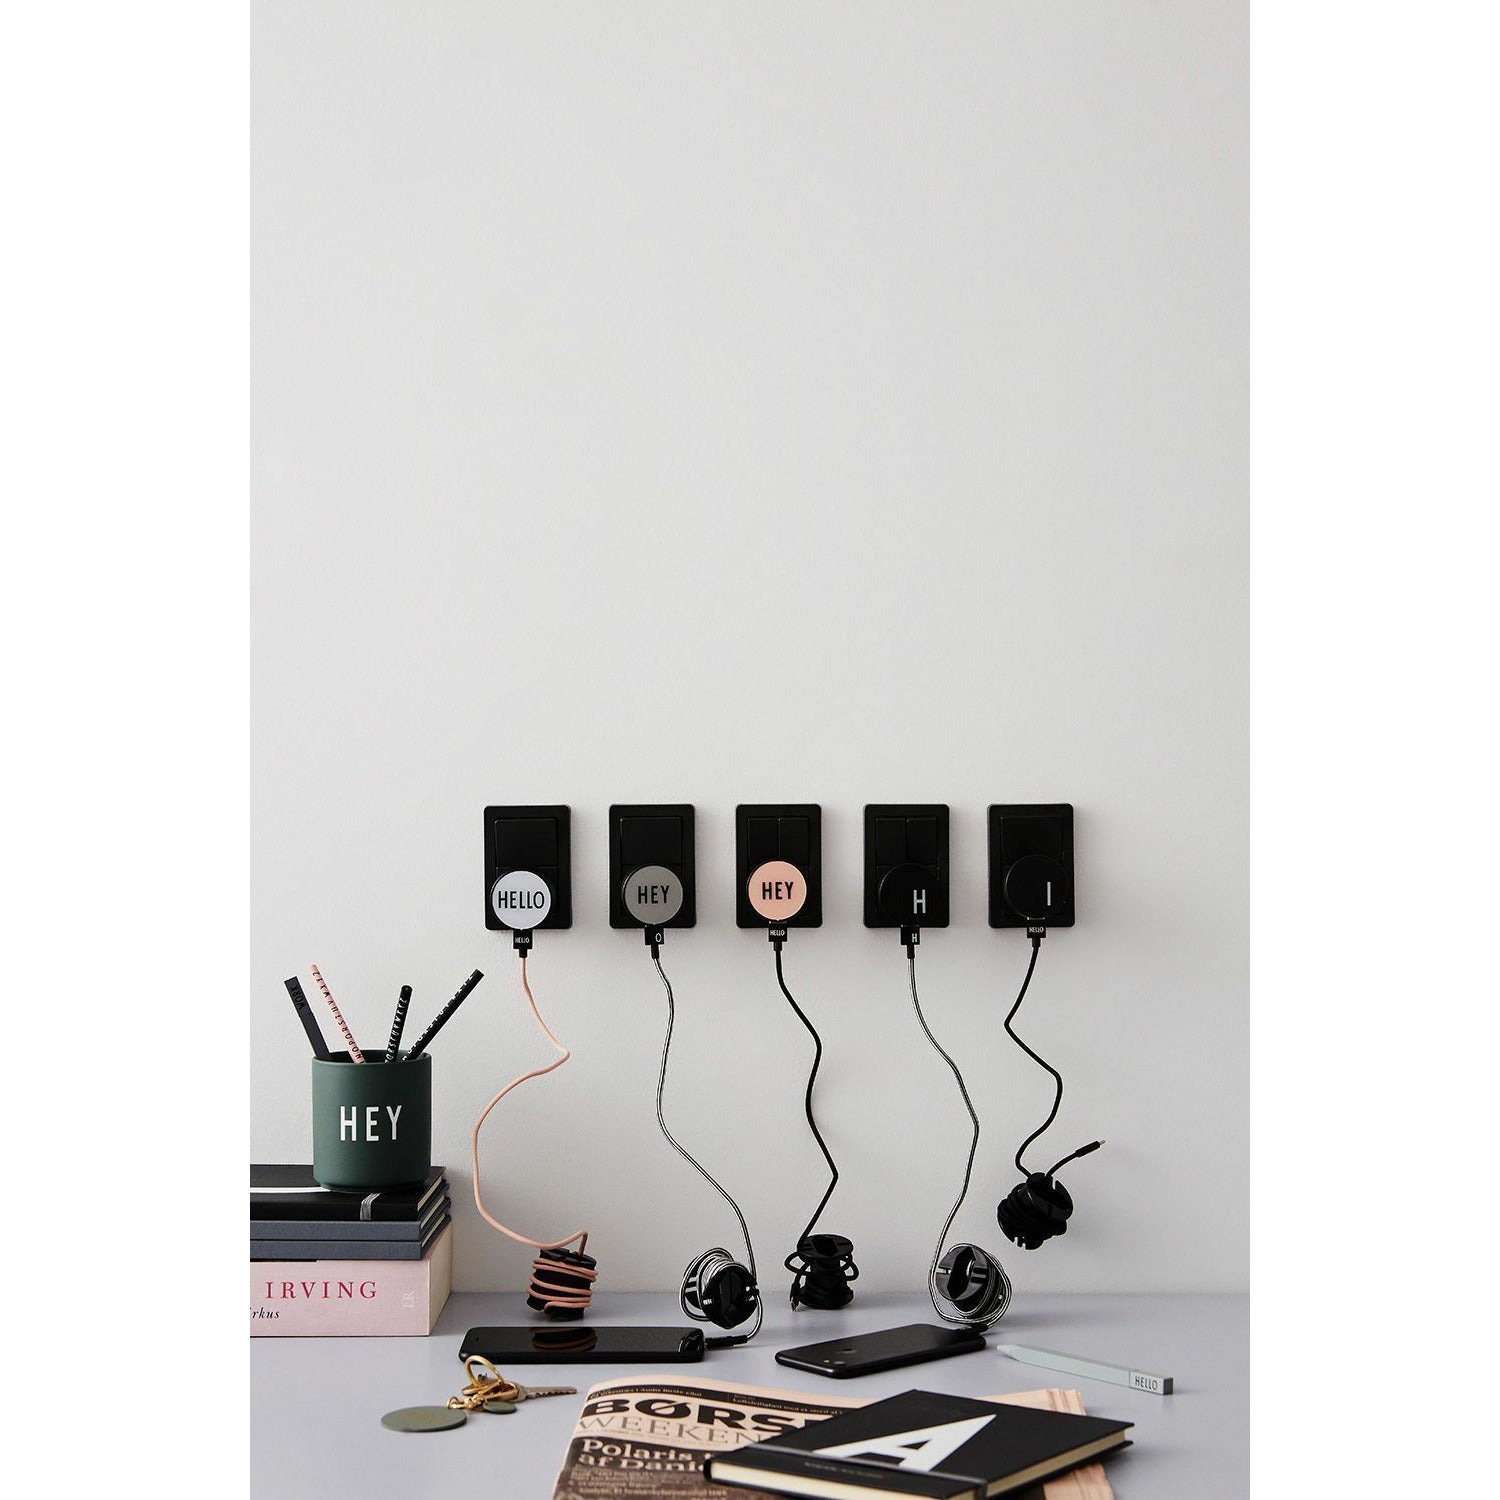 Design Lettere Mycharger hey, grigio